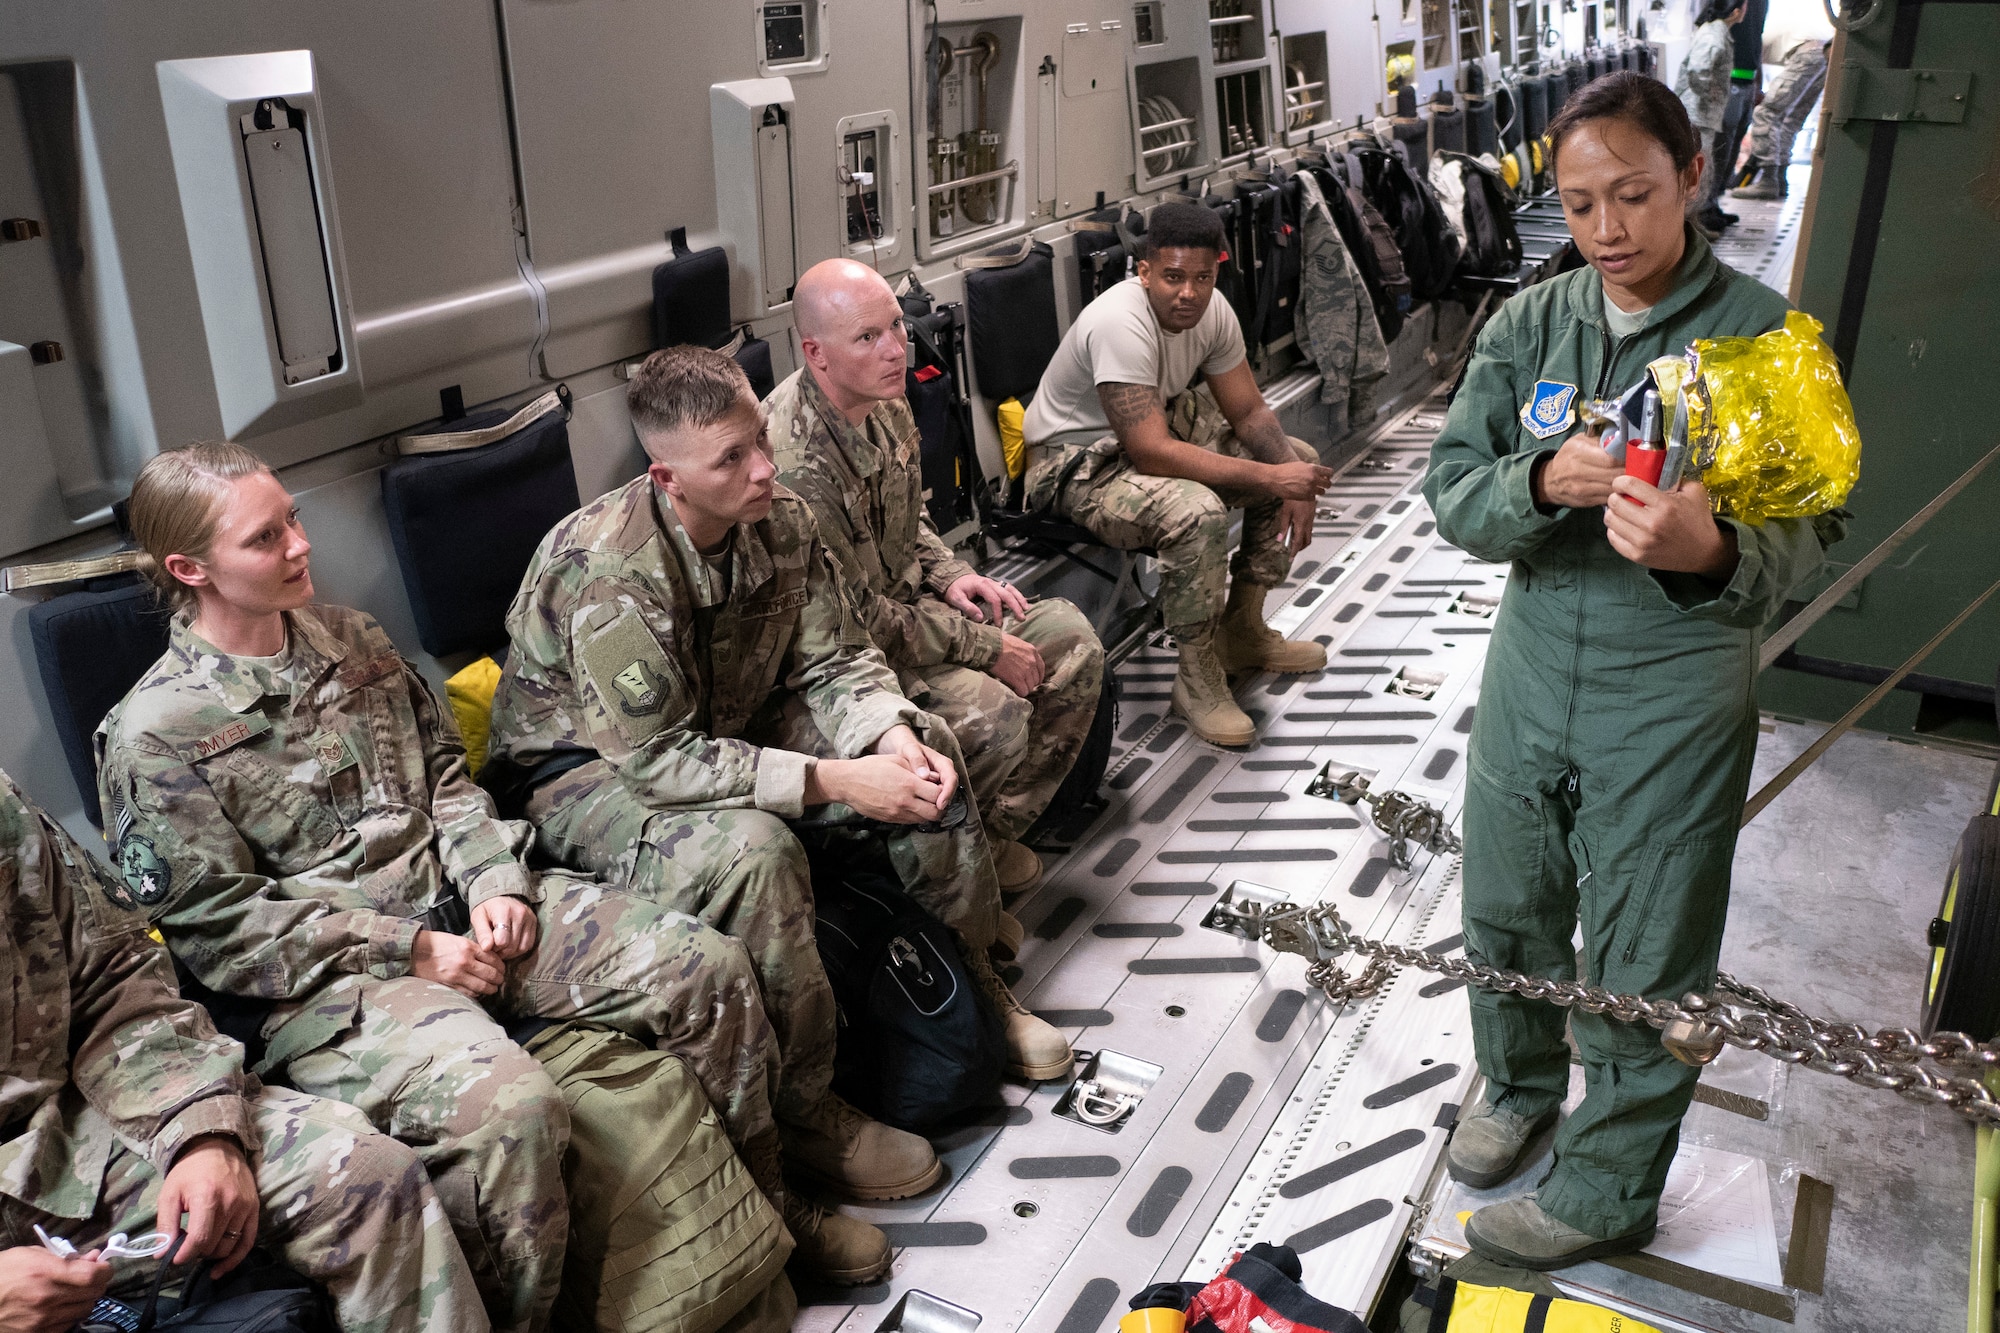 Tech. Sgt. Joleen Morse, 204th Airlift Squadron loadmaster, provides a safety briefing to members of the 435th Contingency Response Squadron on a C-17 Globemaster III in preparation for exercise Swift Response 18